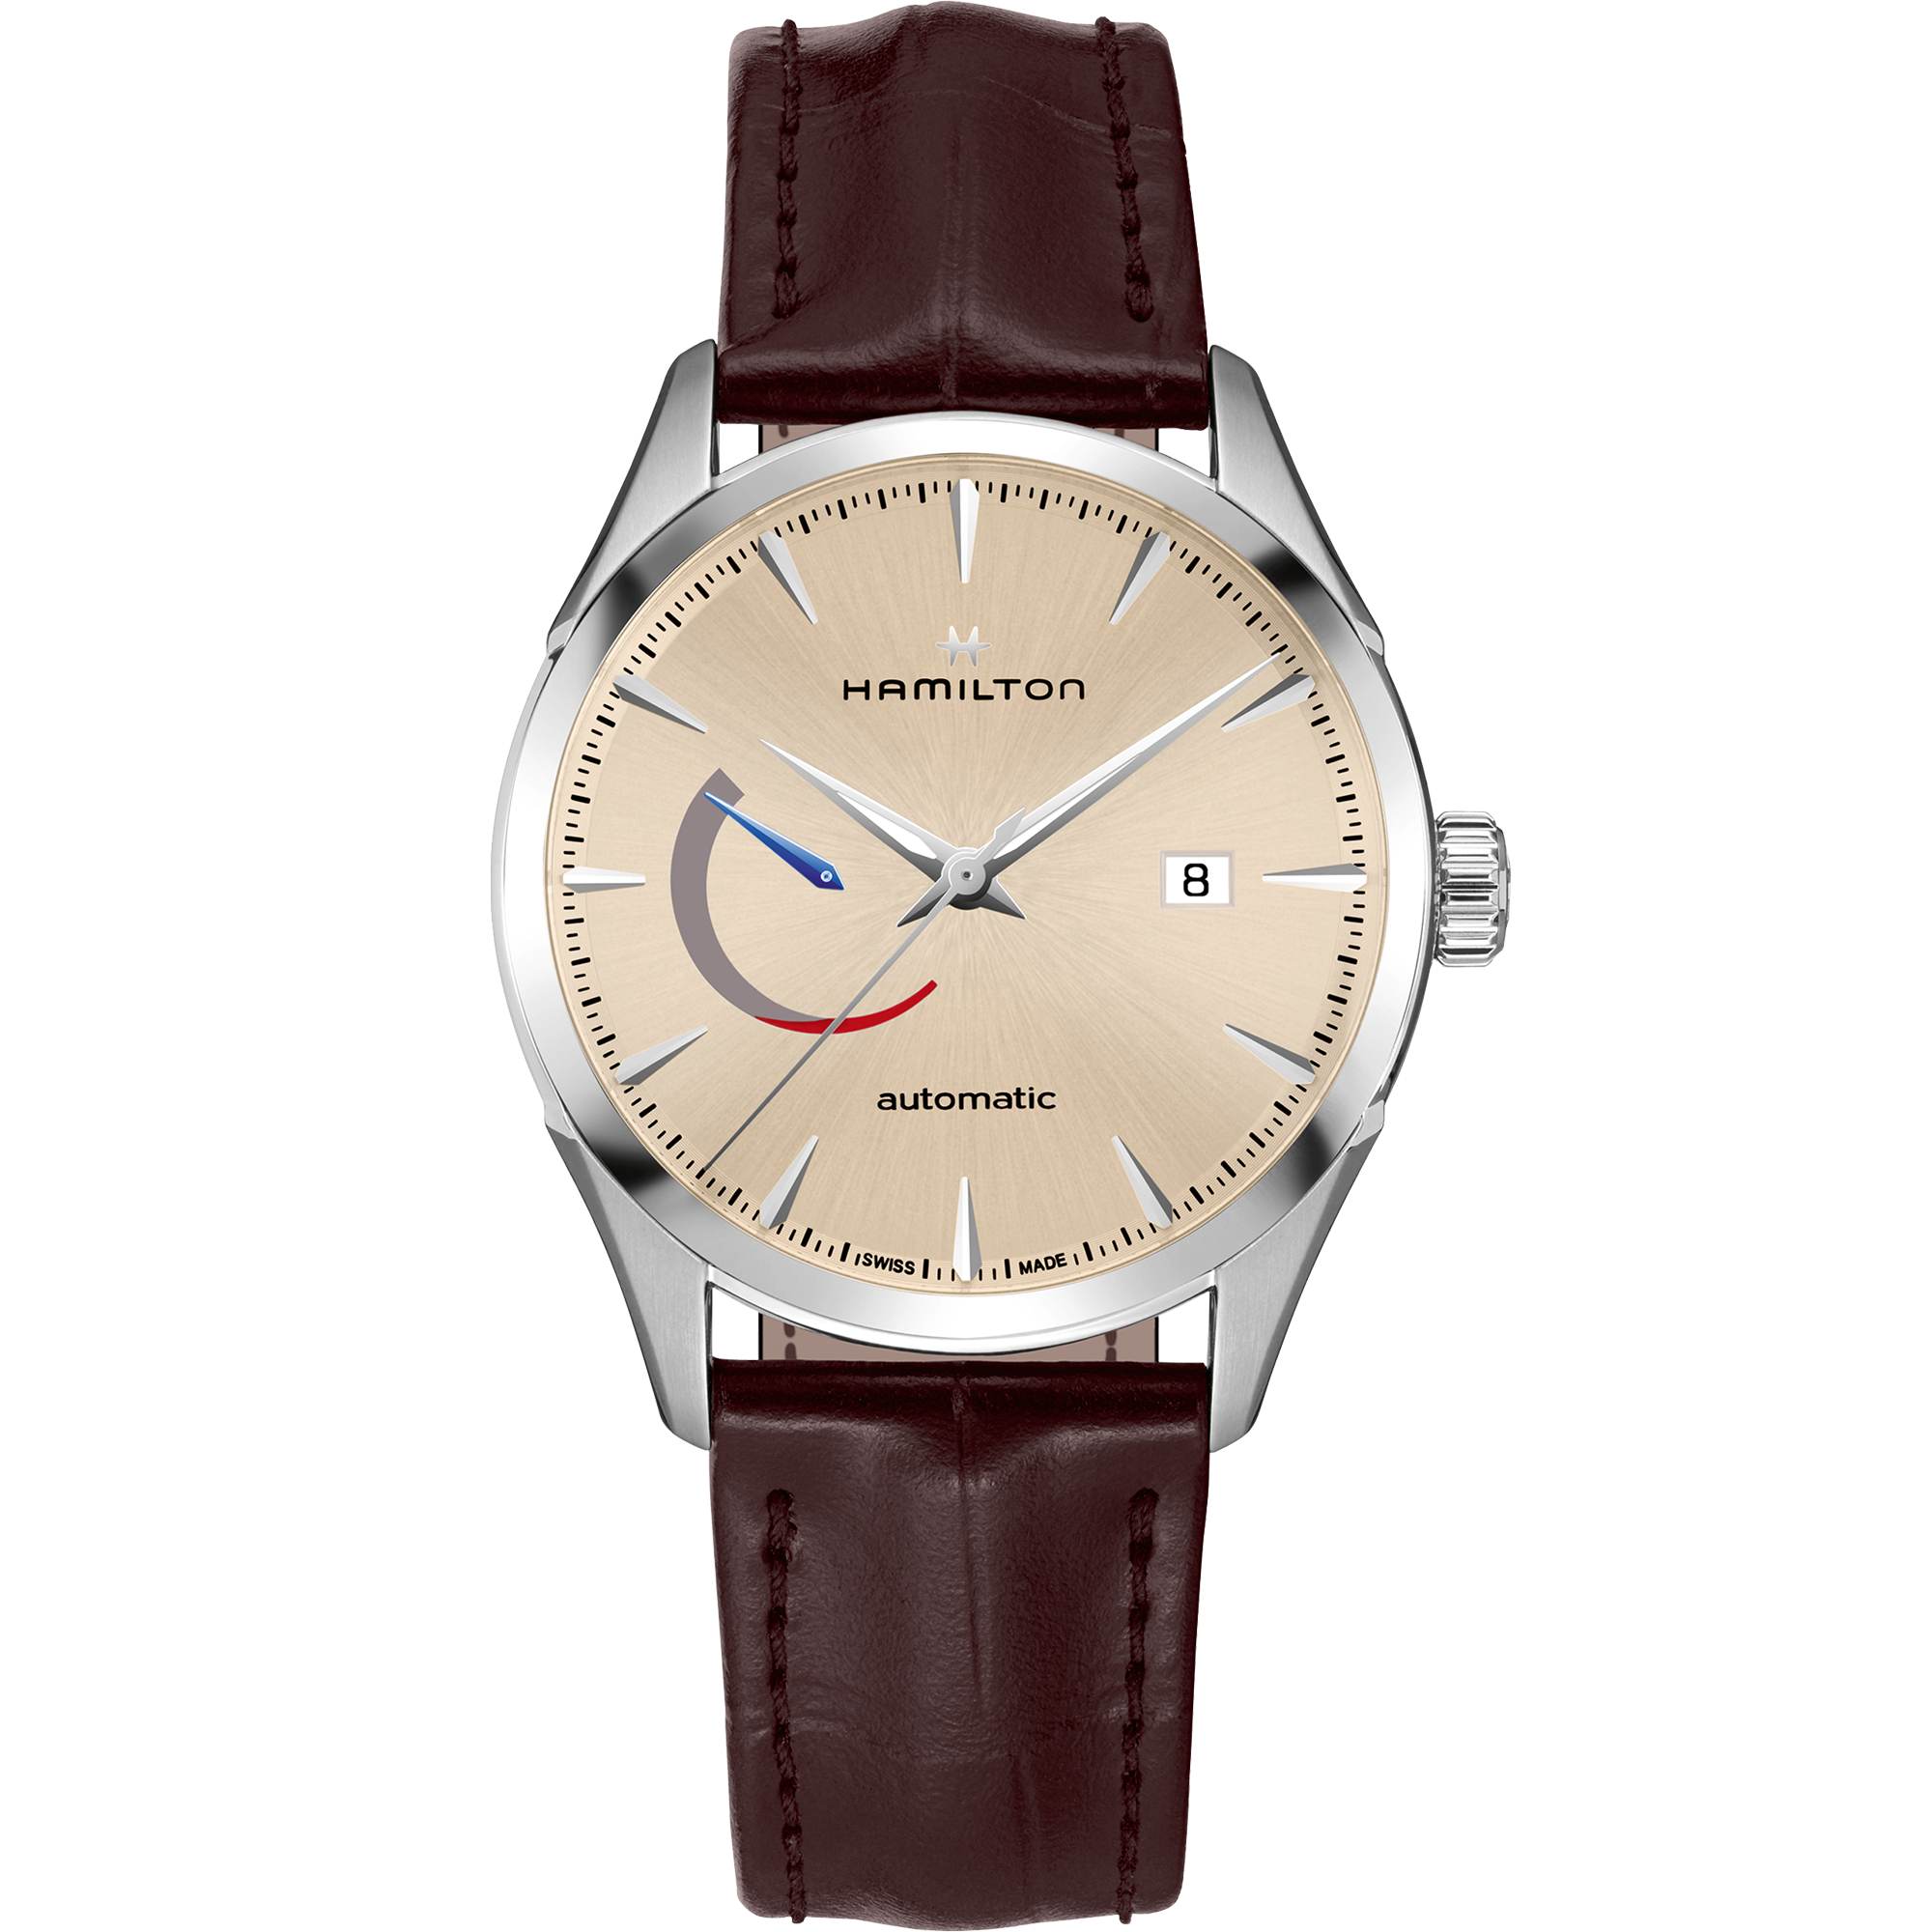 Jazzmaster Automatic Watch Power Reserve - Beige Dial - H32635521 ...